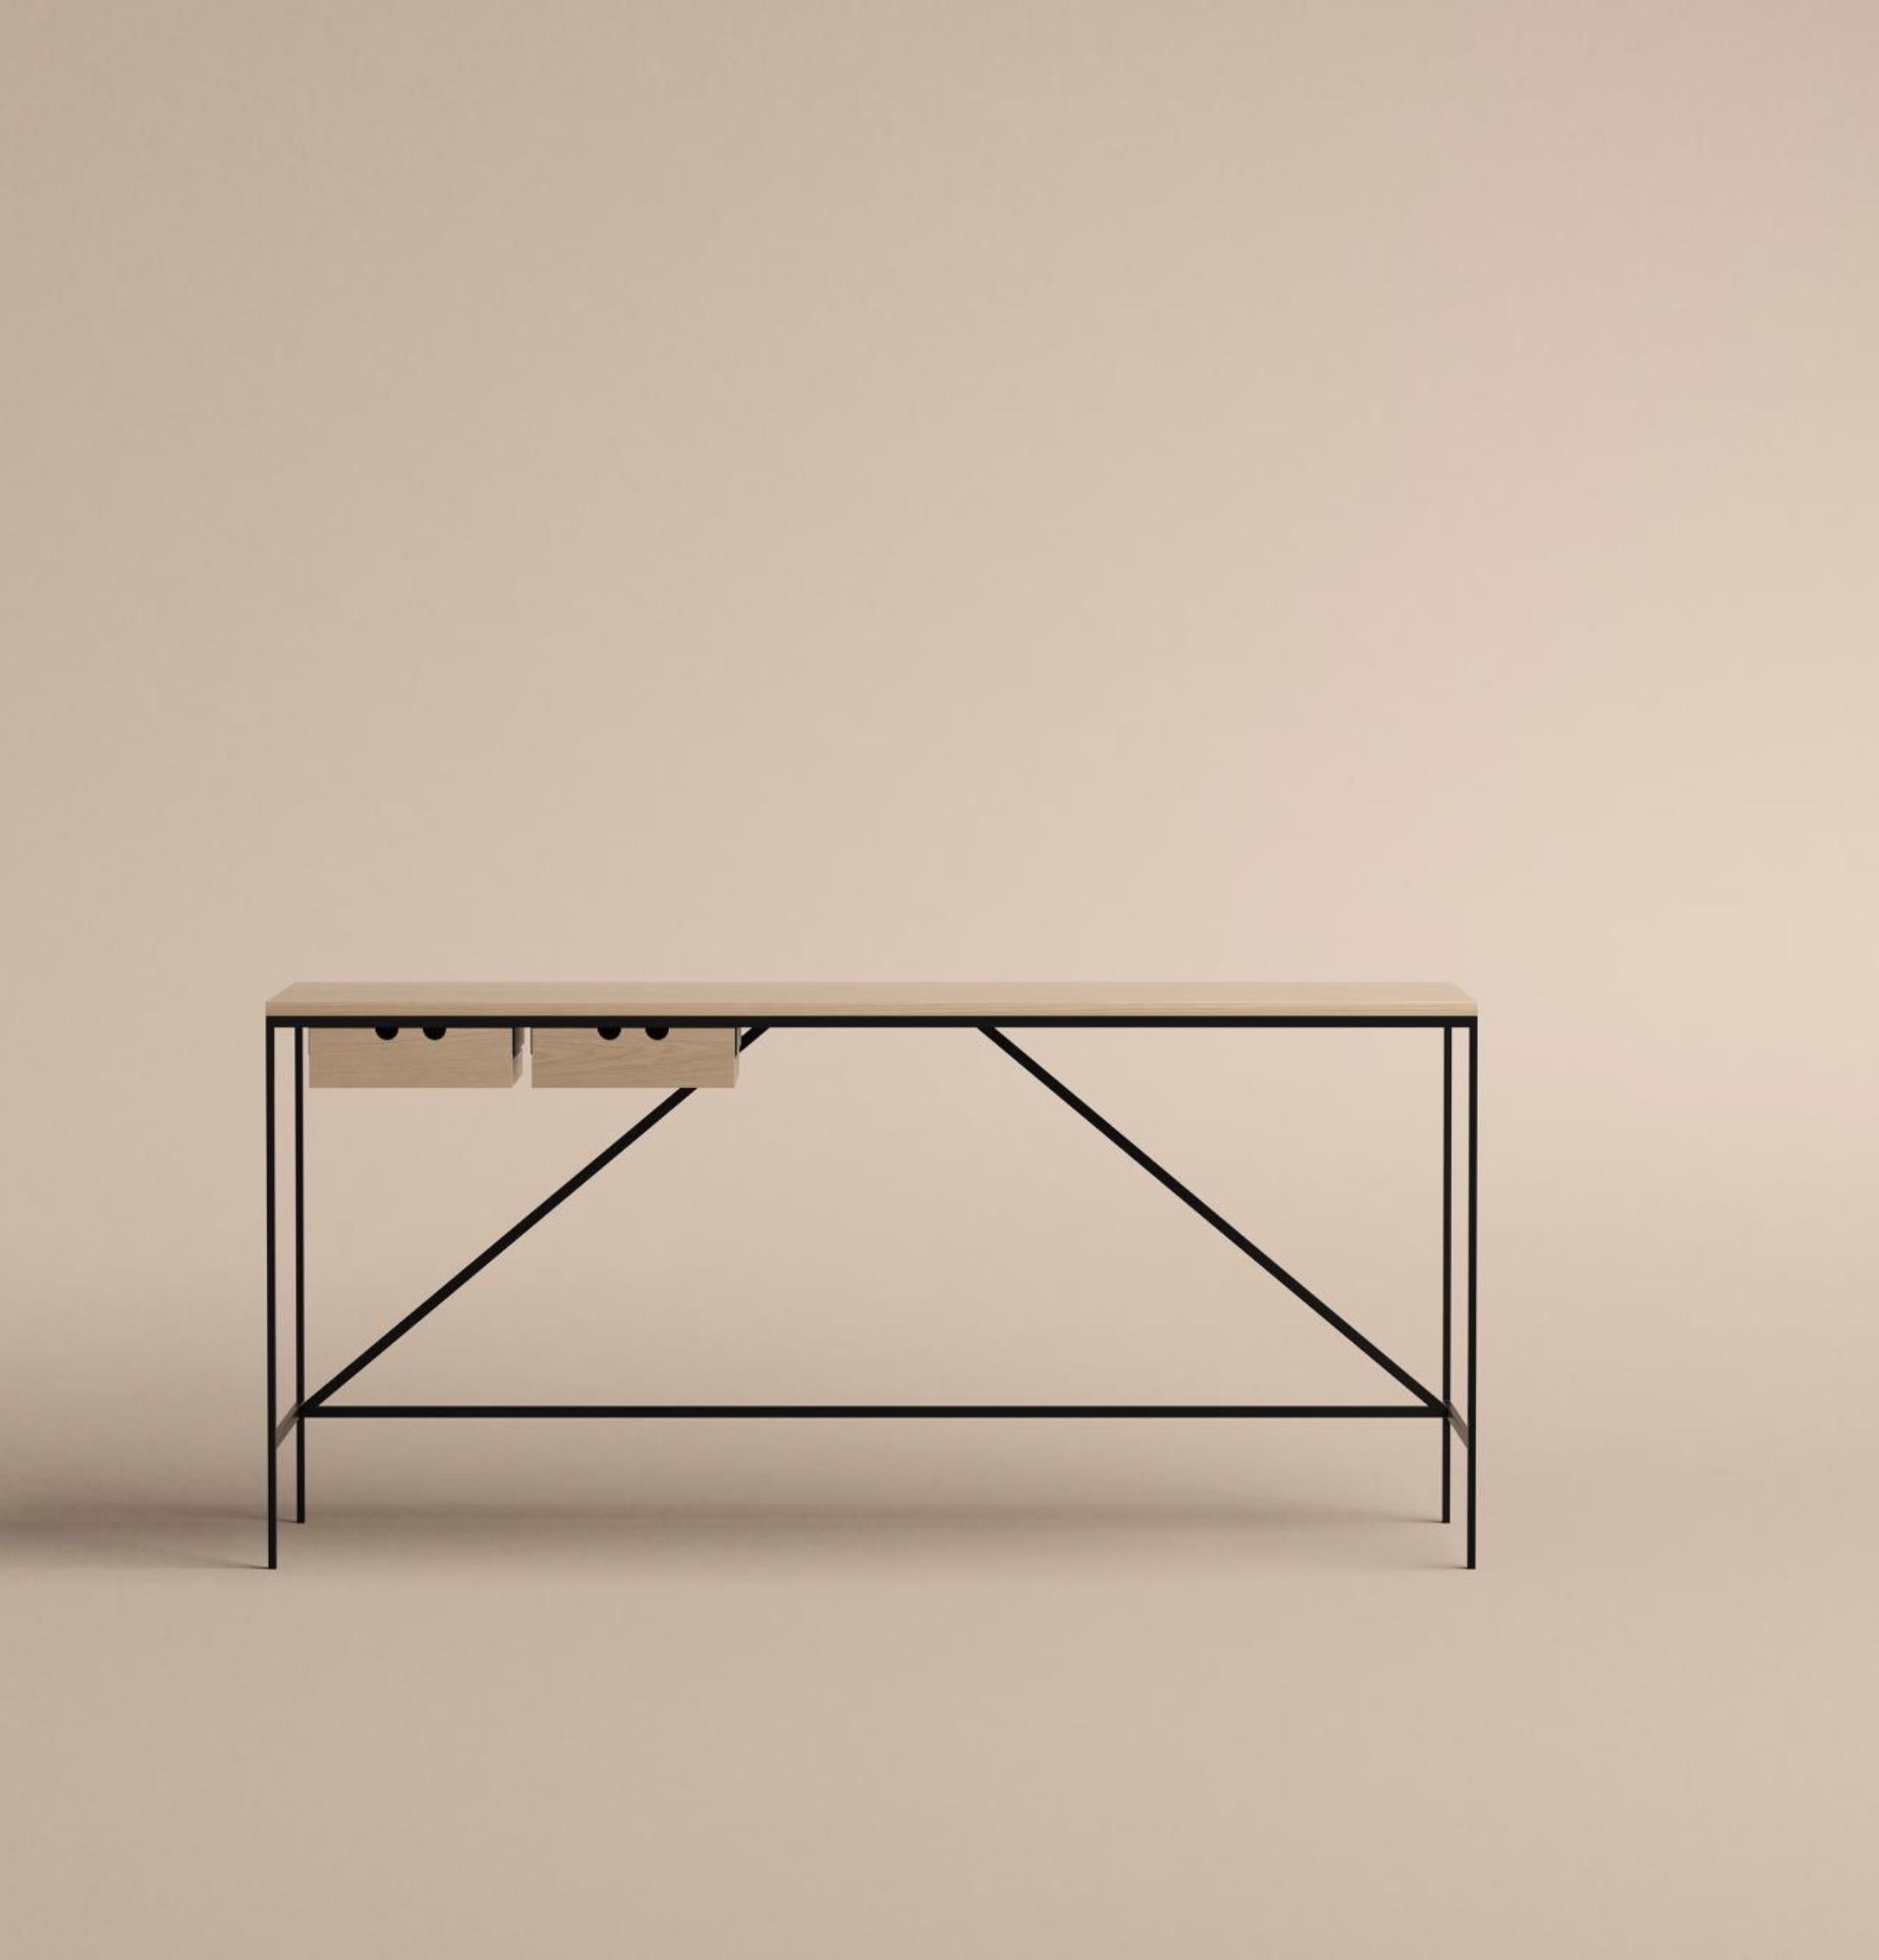 Console with two drawers designed by Paul McCobb in 1952. The foundation of the Cache series, part of Paul McCobb’s extensive Planner series, is a beautifully simplistic and easy table with slim and straight steel legs, stripped from any details or